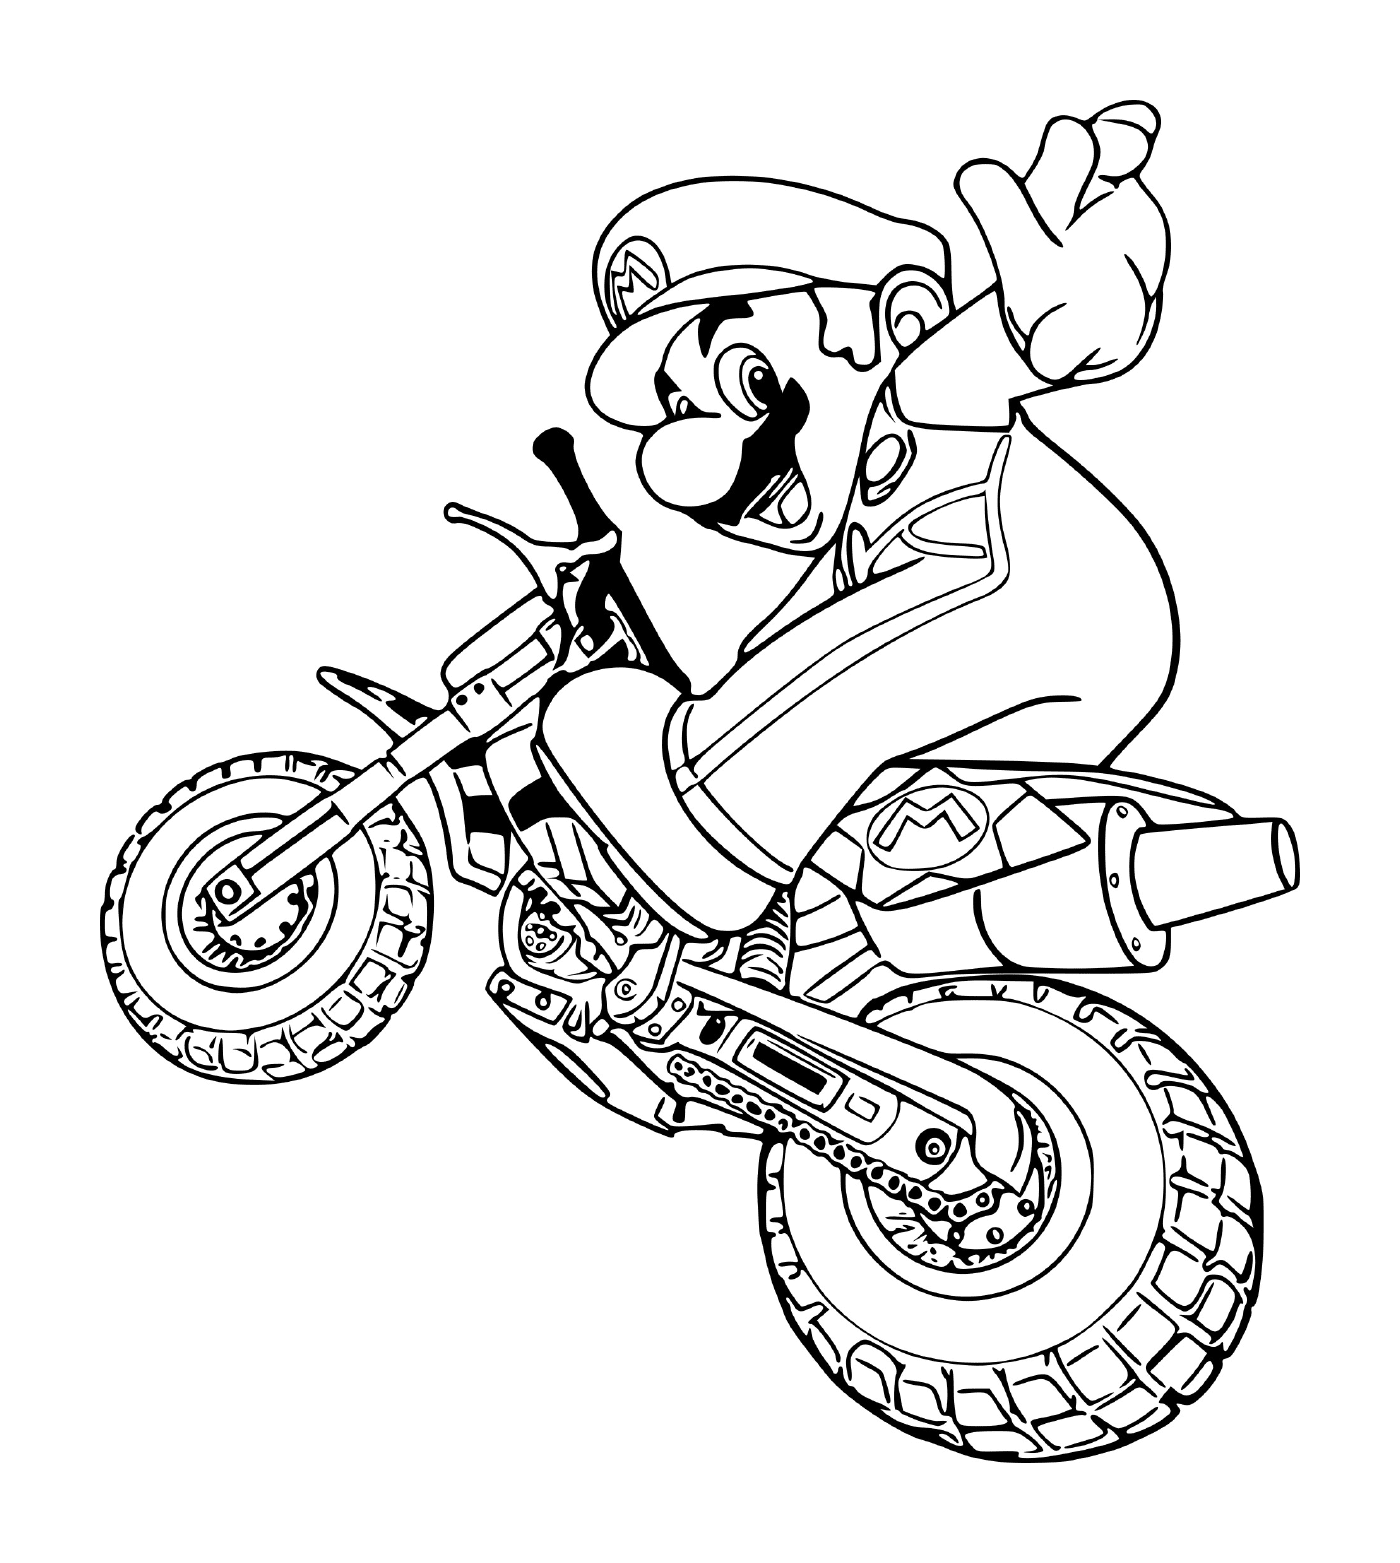  Mario in motorcycle mode, on a motorcycle 